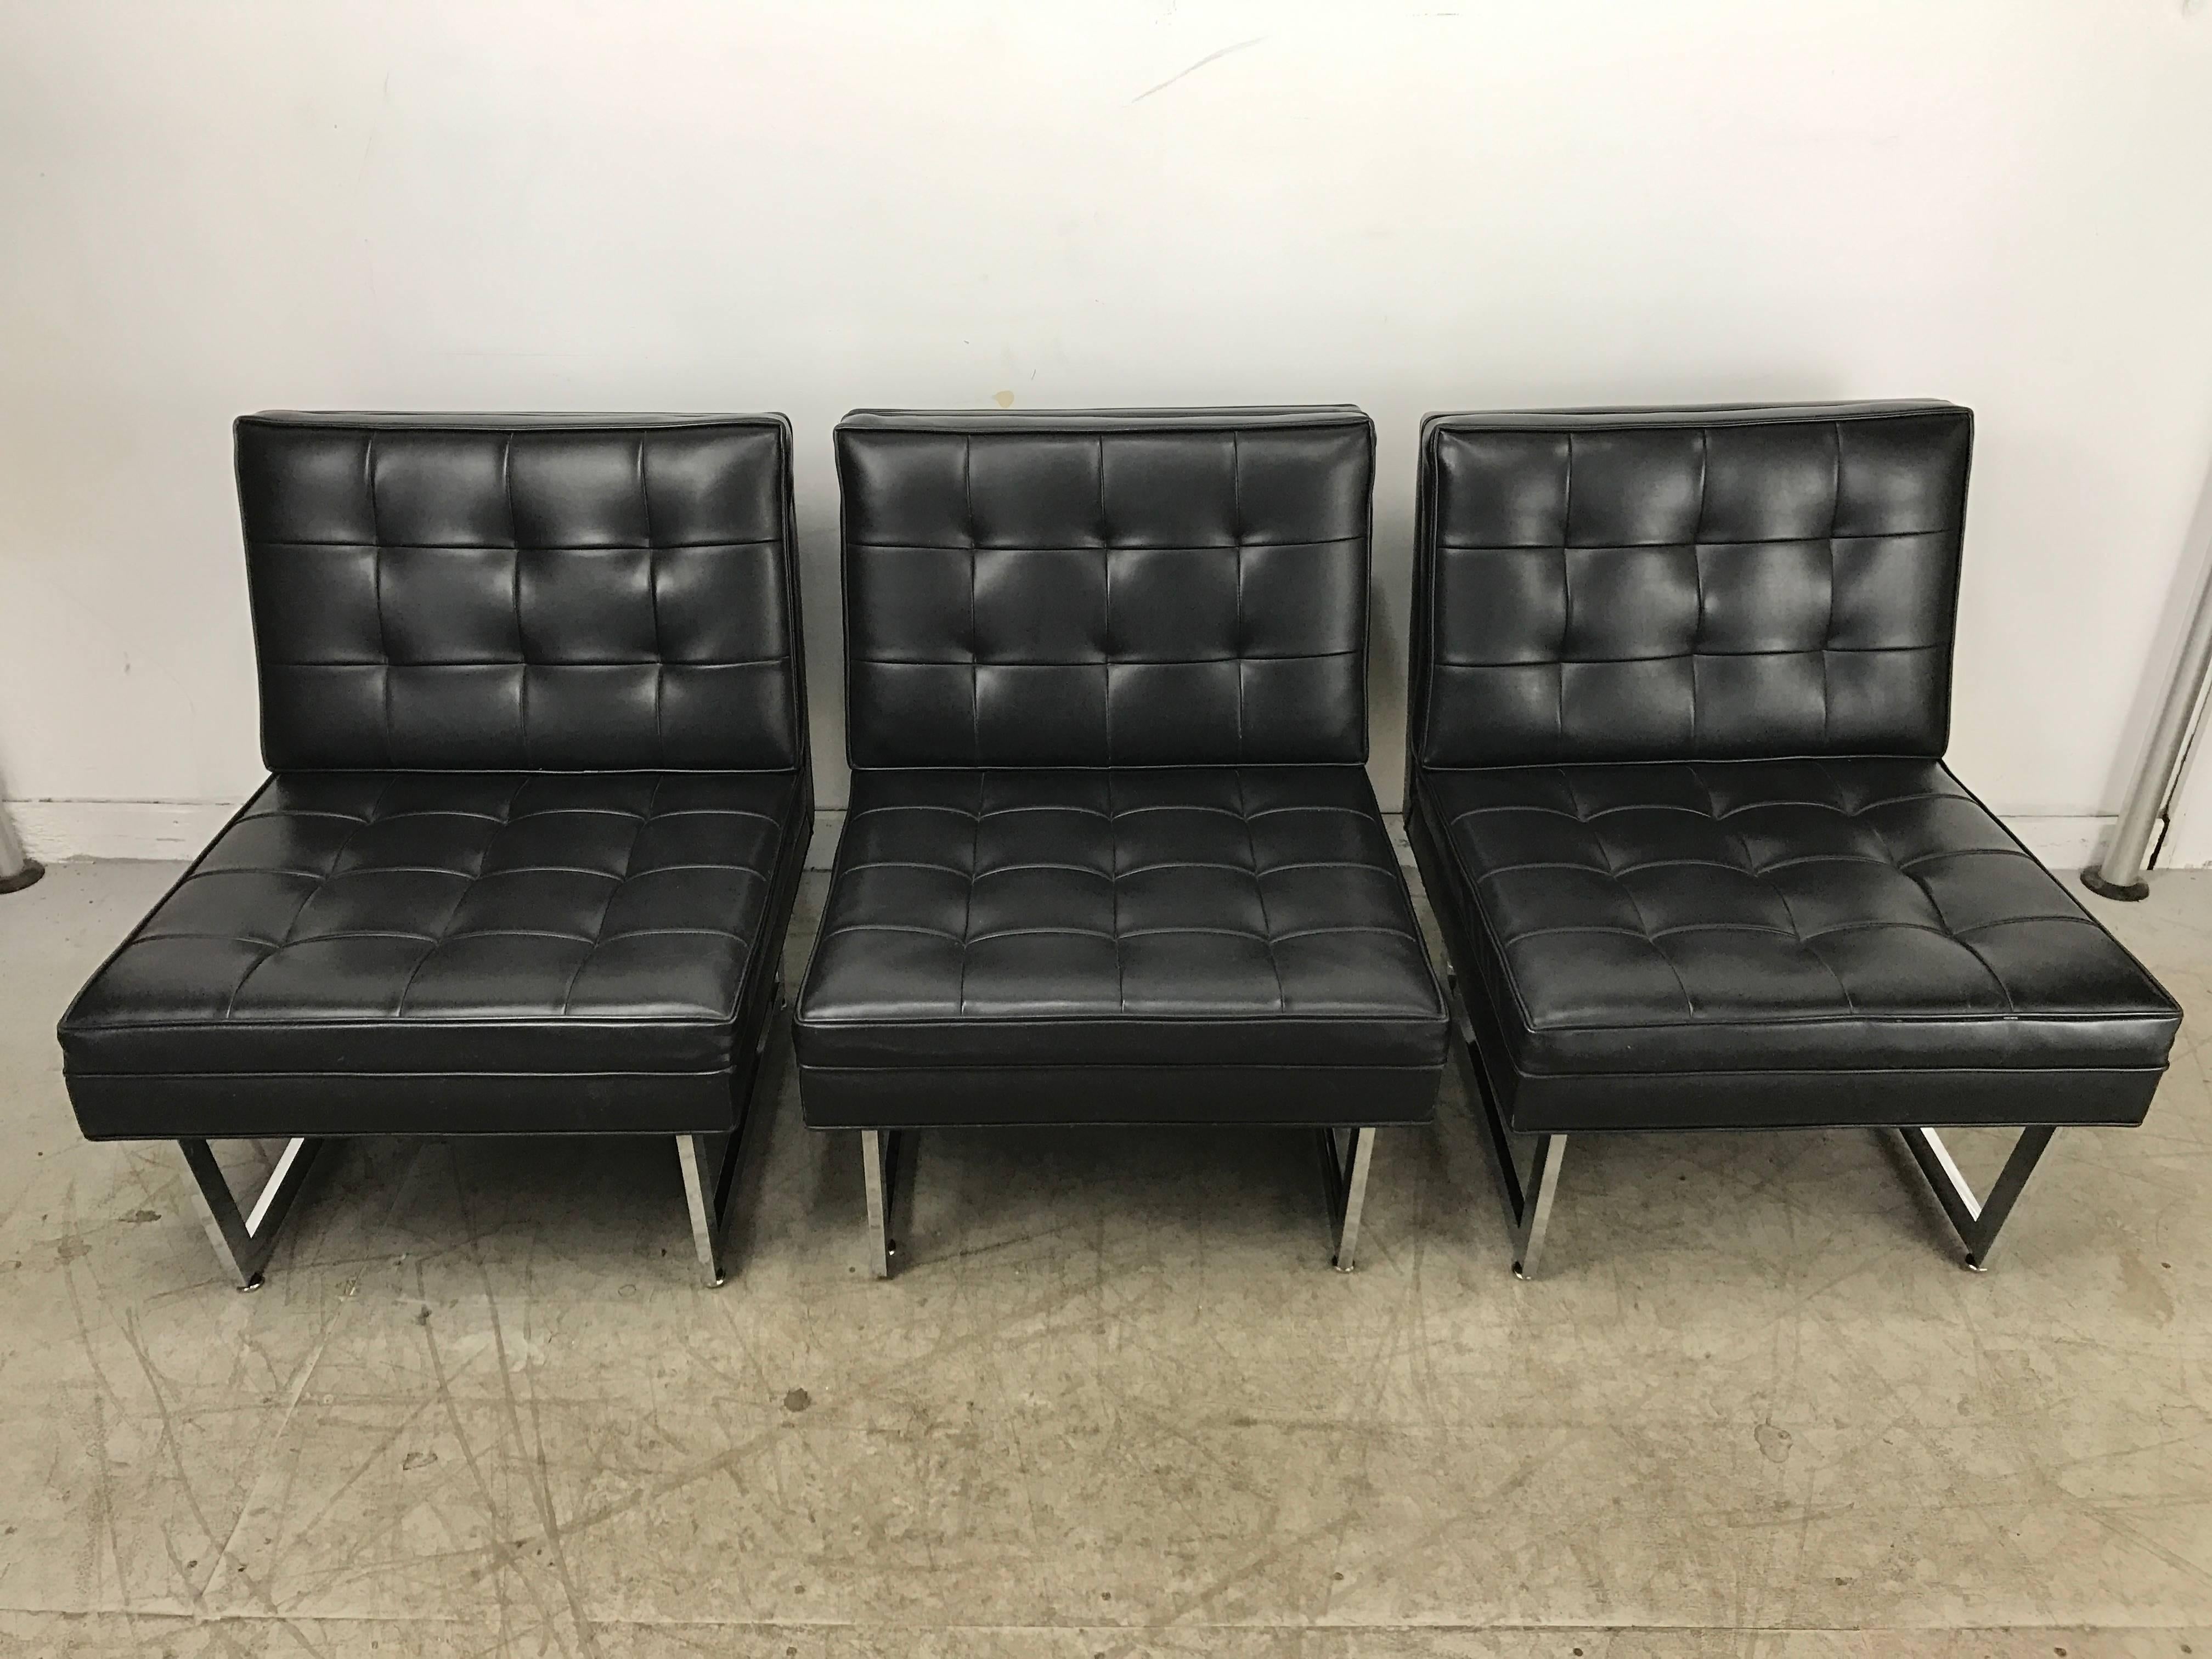 American Black and Chrome Modular Seating, Button Tufted Sofa, Mies Tugenhat